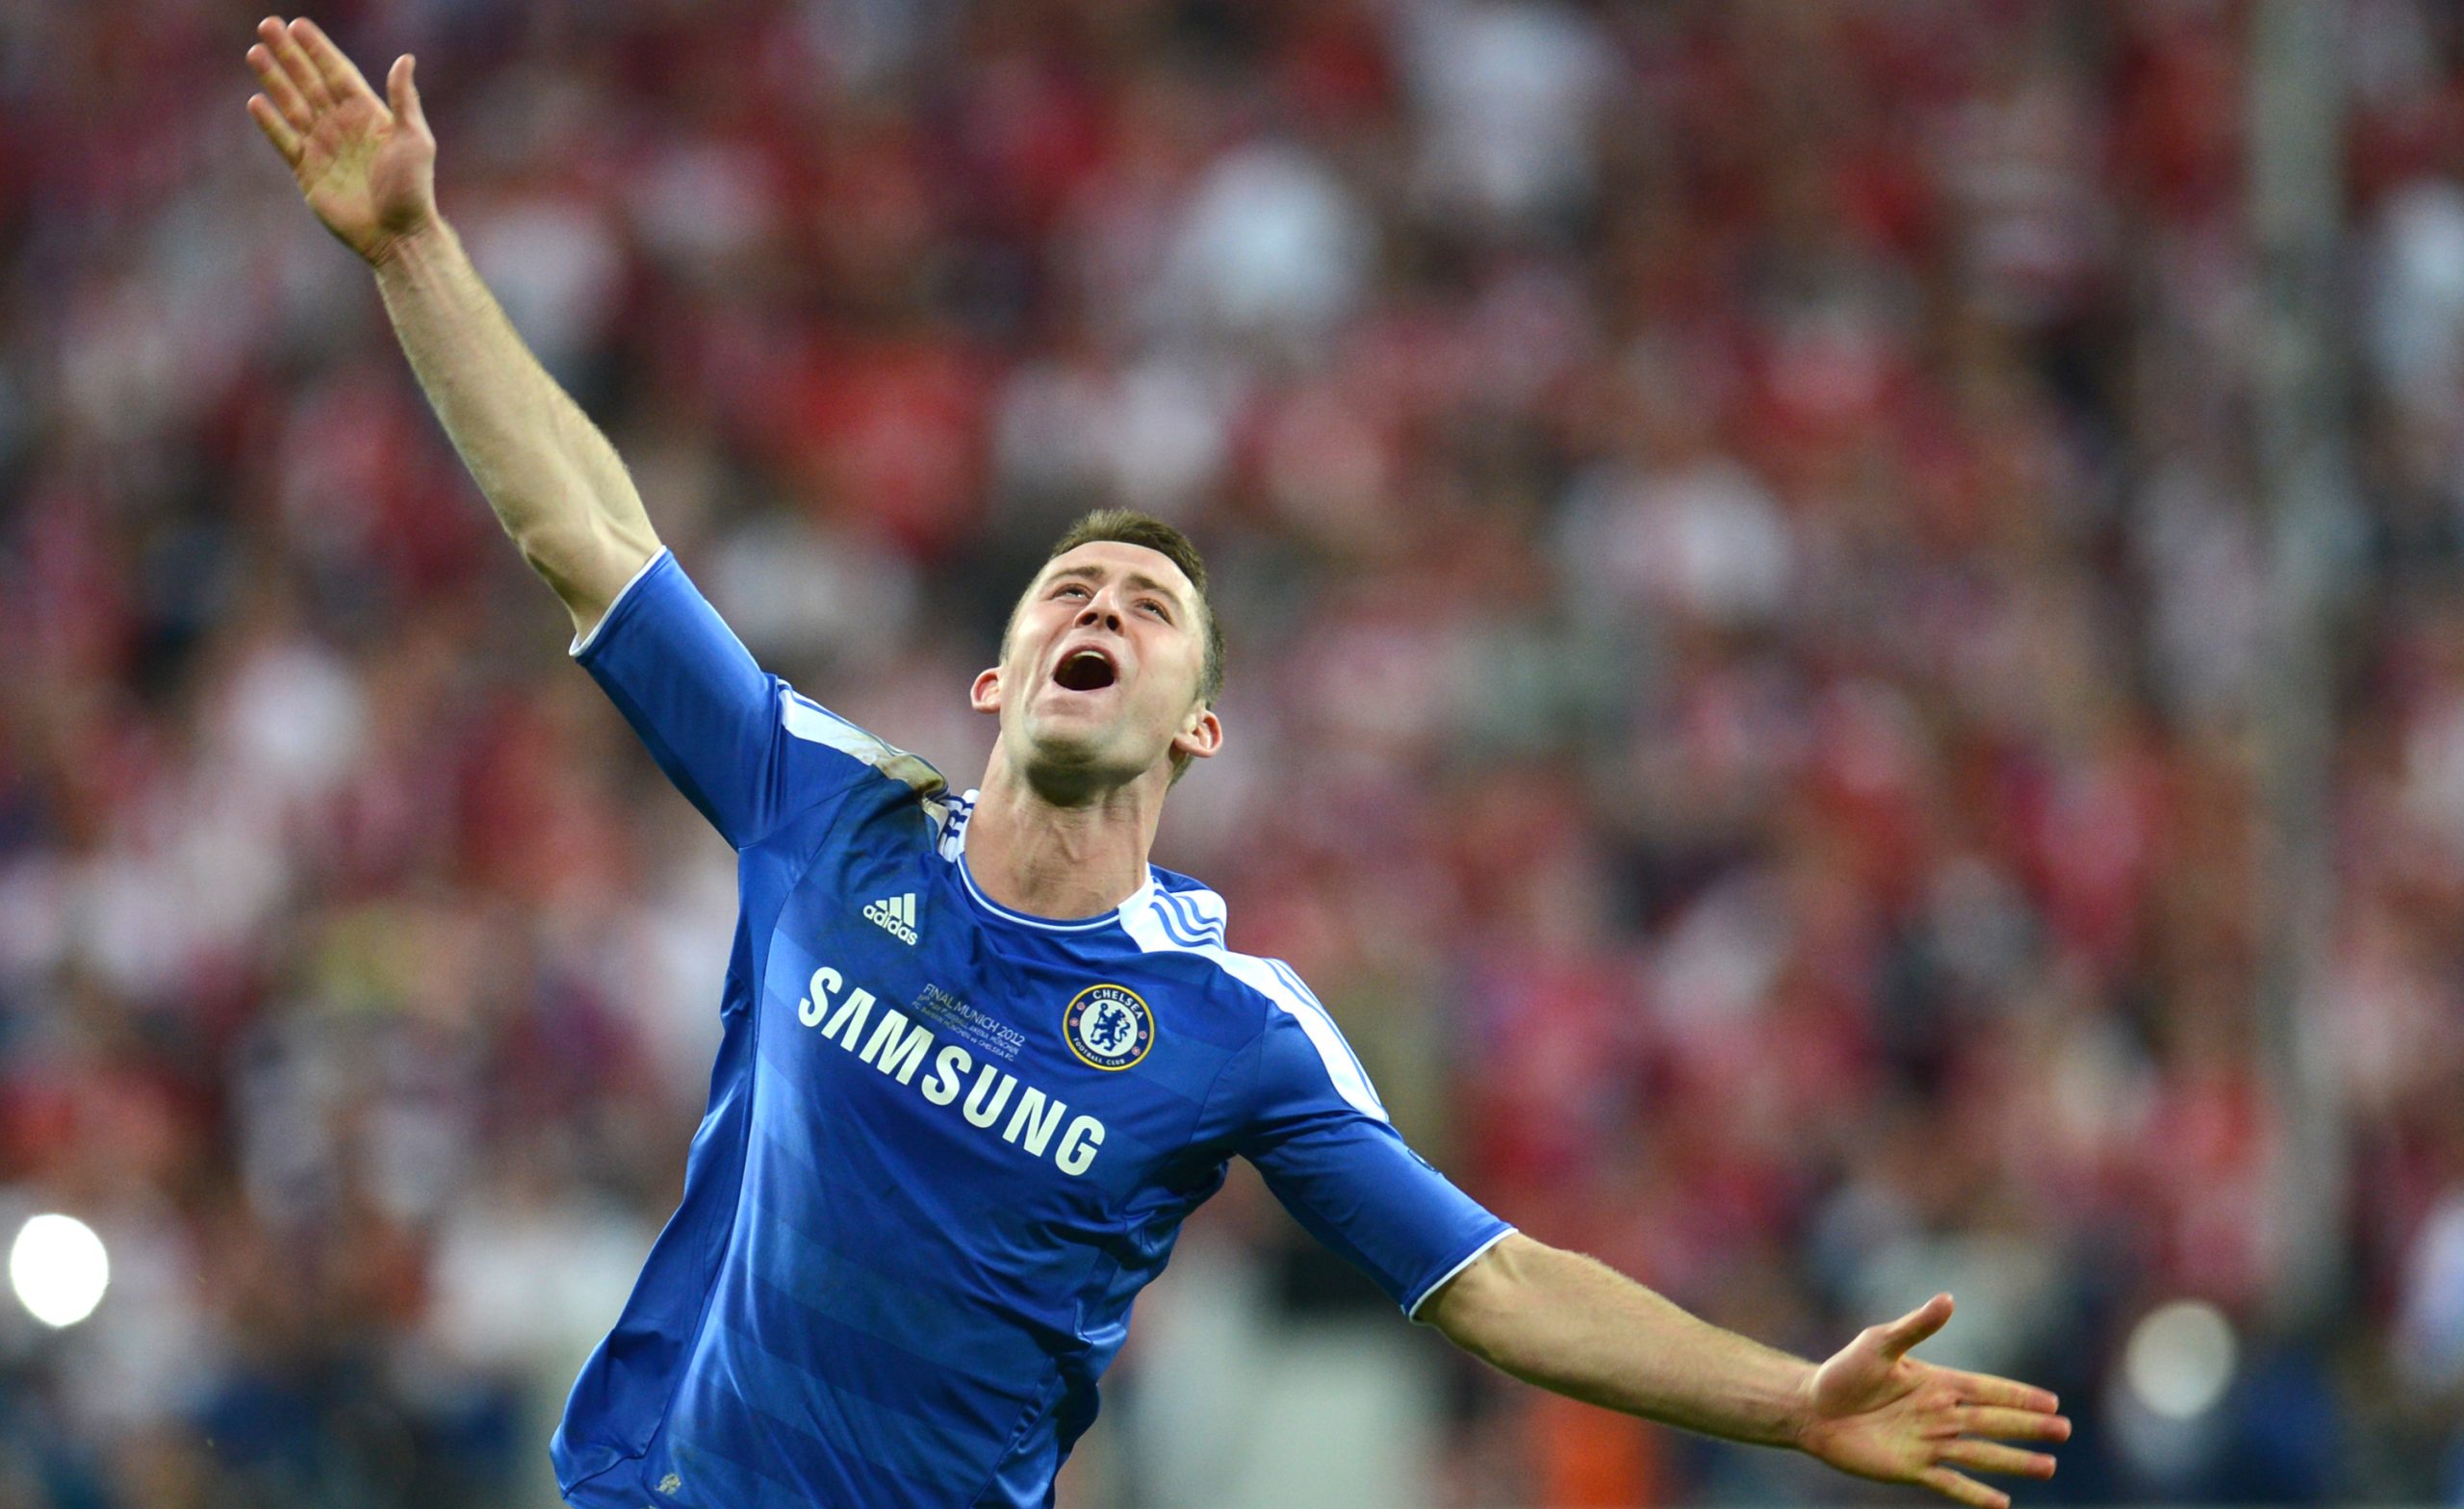 Gary Cahill during his time at Chelsea. (Image by PATRIK STOLLARZ/AFP/GettyImages)